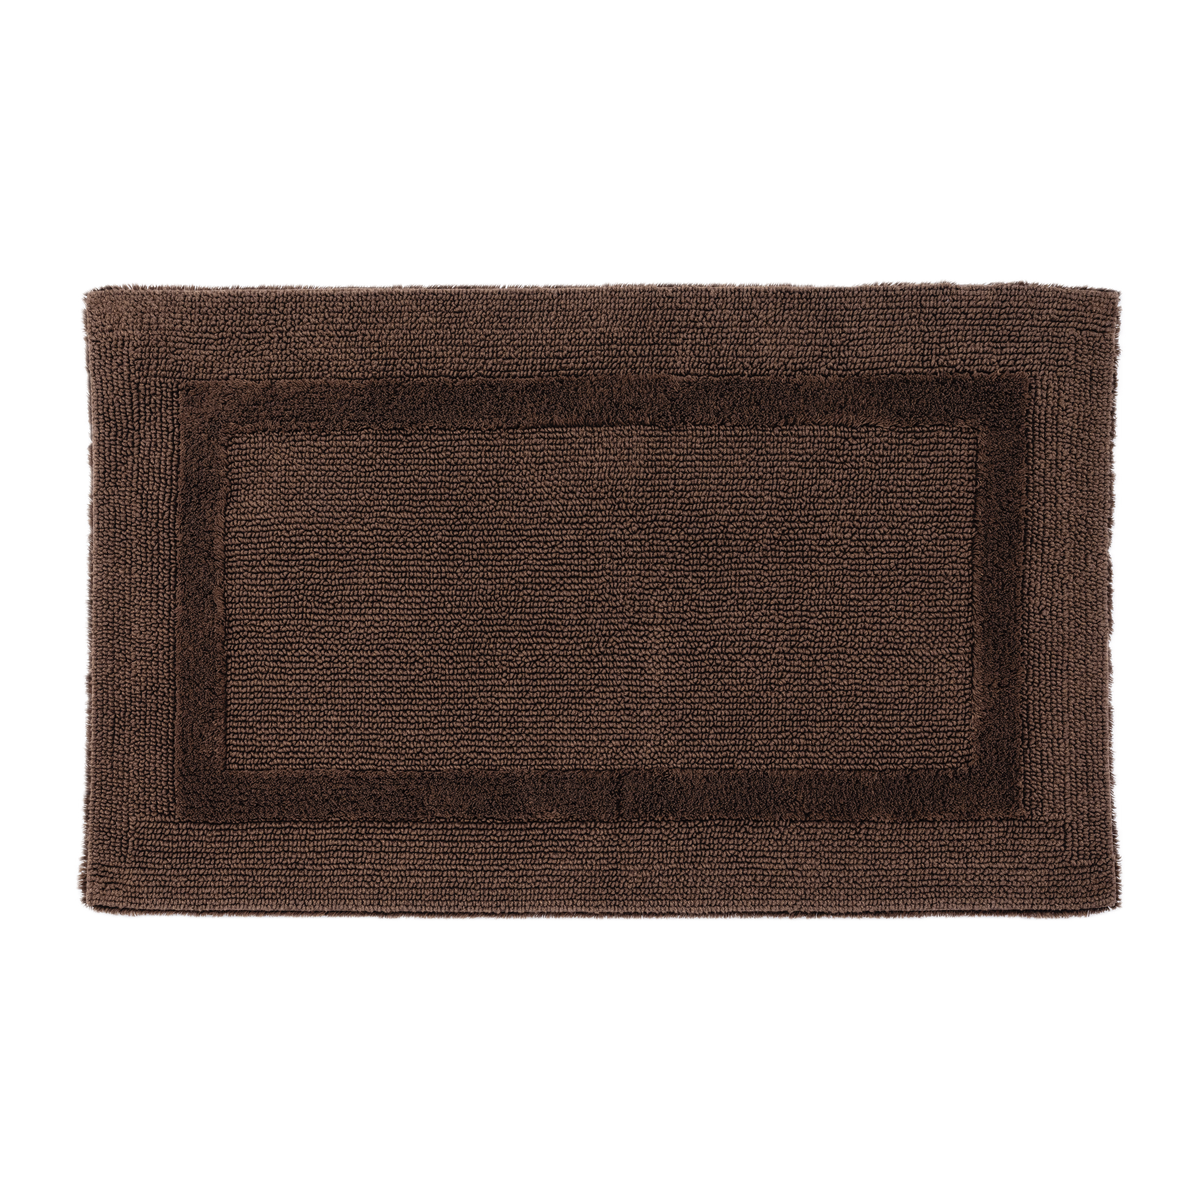 Abyss Habidecor Reversible Bath Rug in Mustang Color